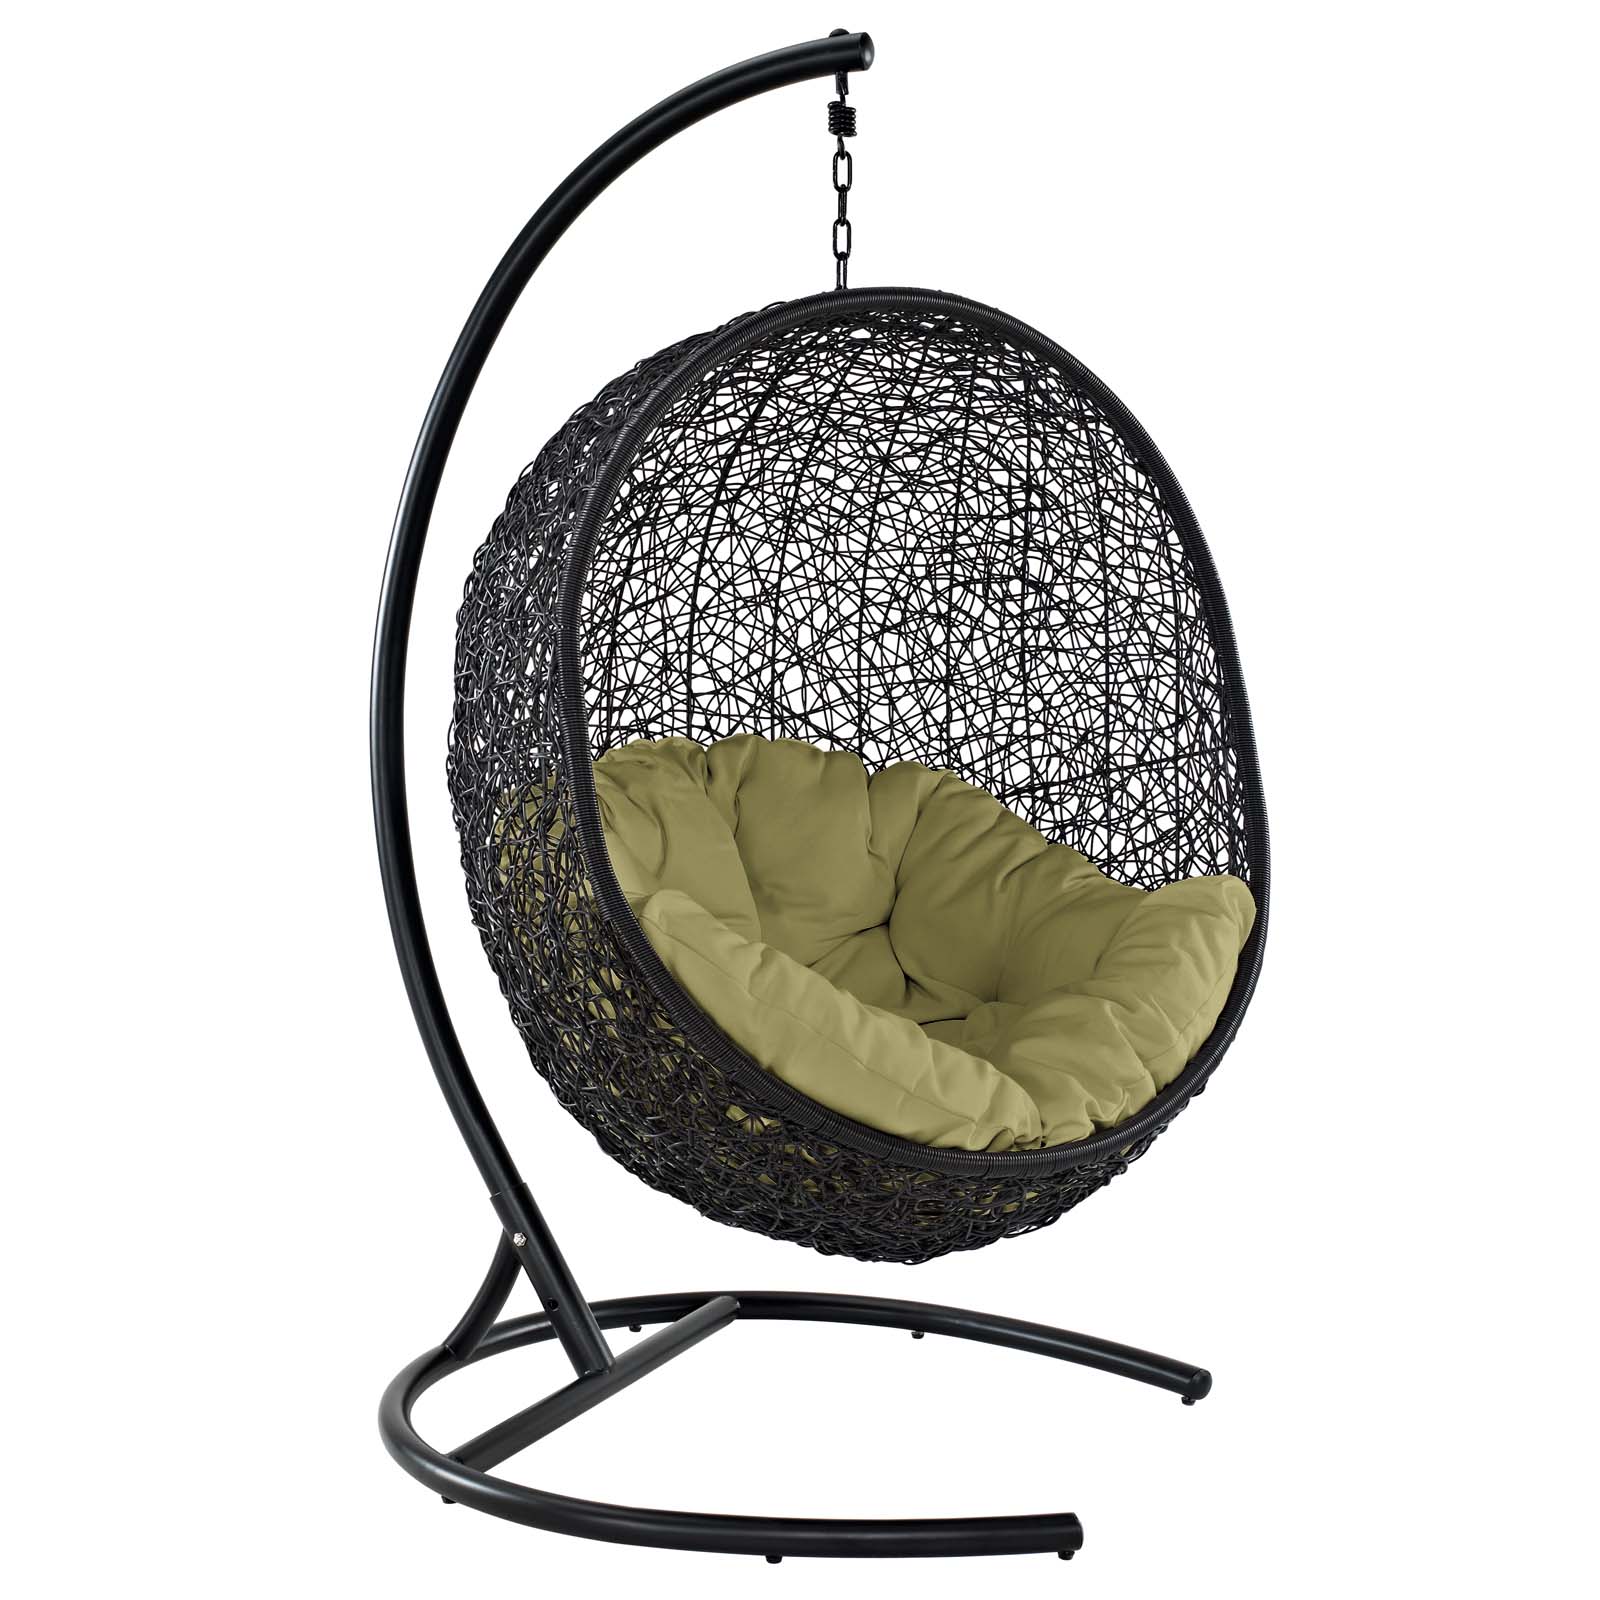 Modway Encase Swing Outdoor Patio Lounge Chair in Peridot - image 2 of 8